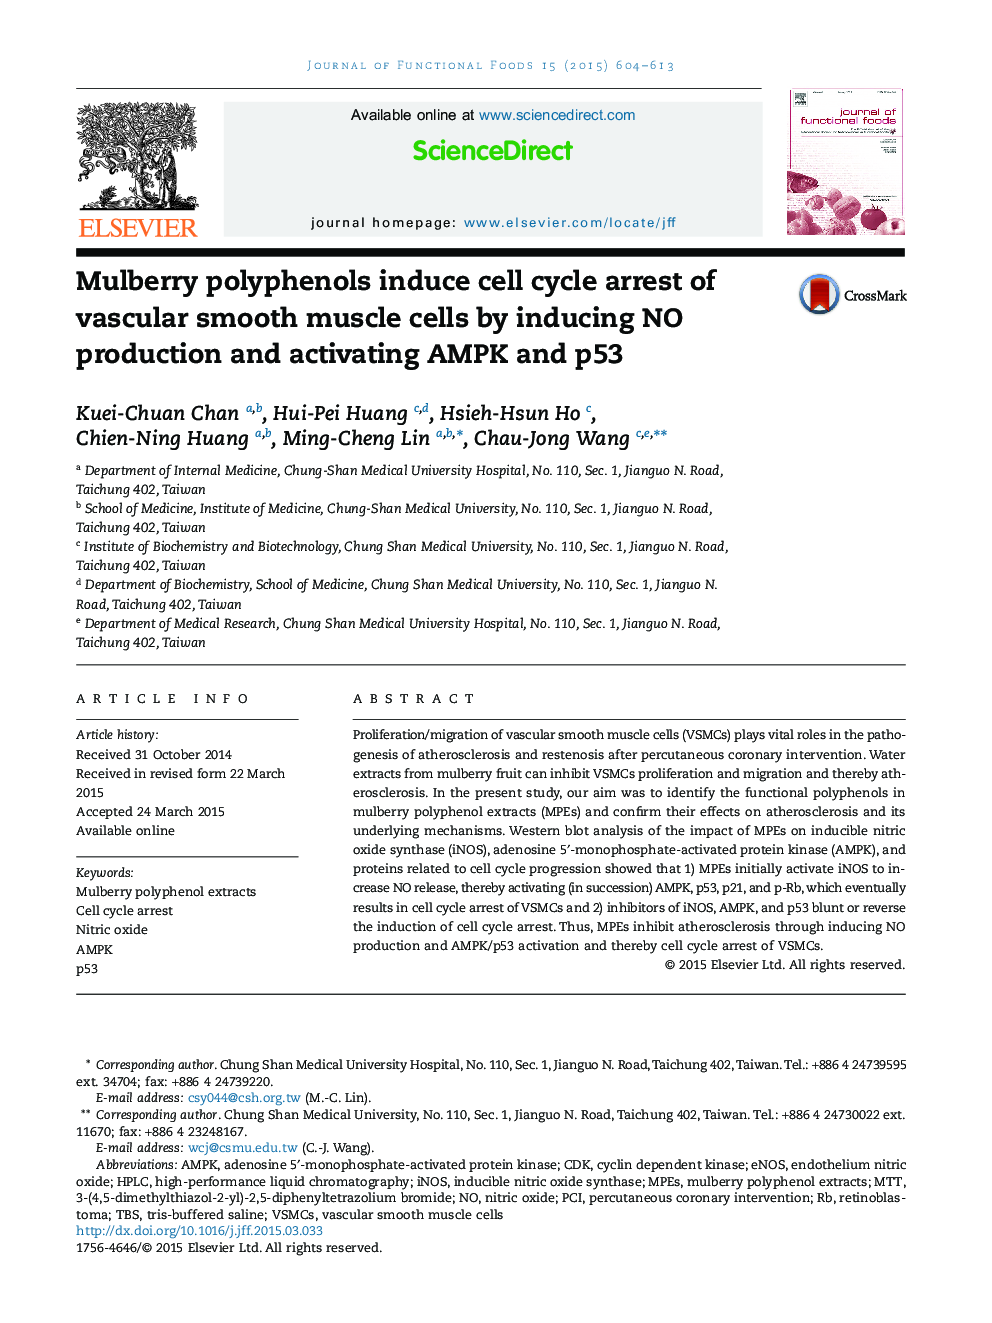 Mulberry polyphenols induce cell cycle arrest of vascular smooth muscle cells by inducing NO production and activating AMPK and p53